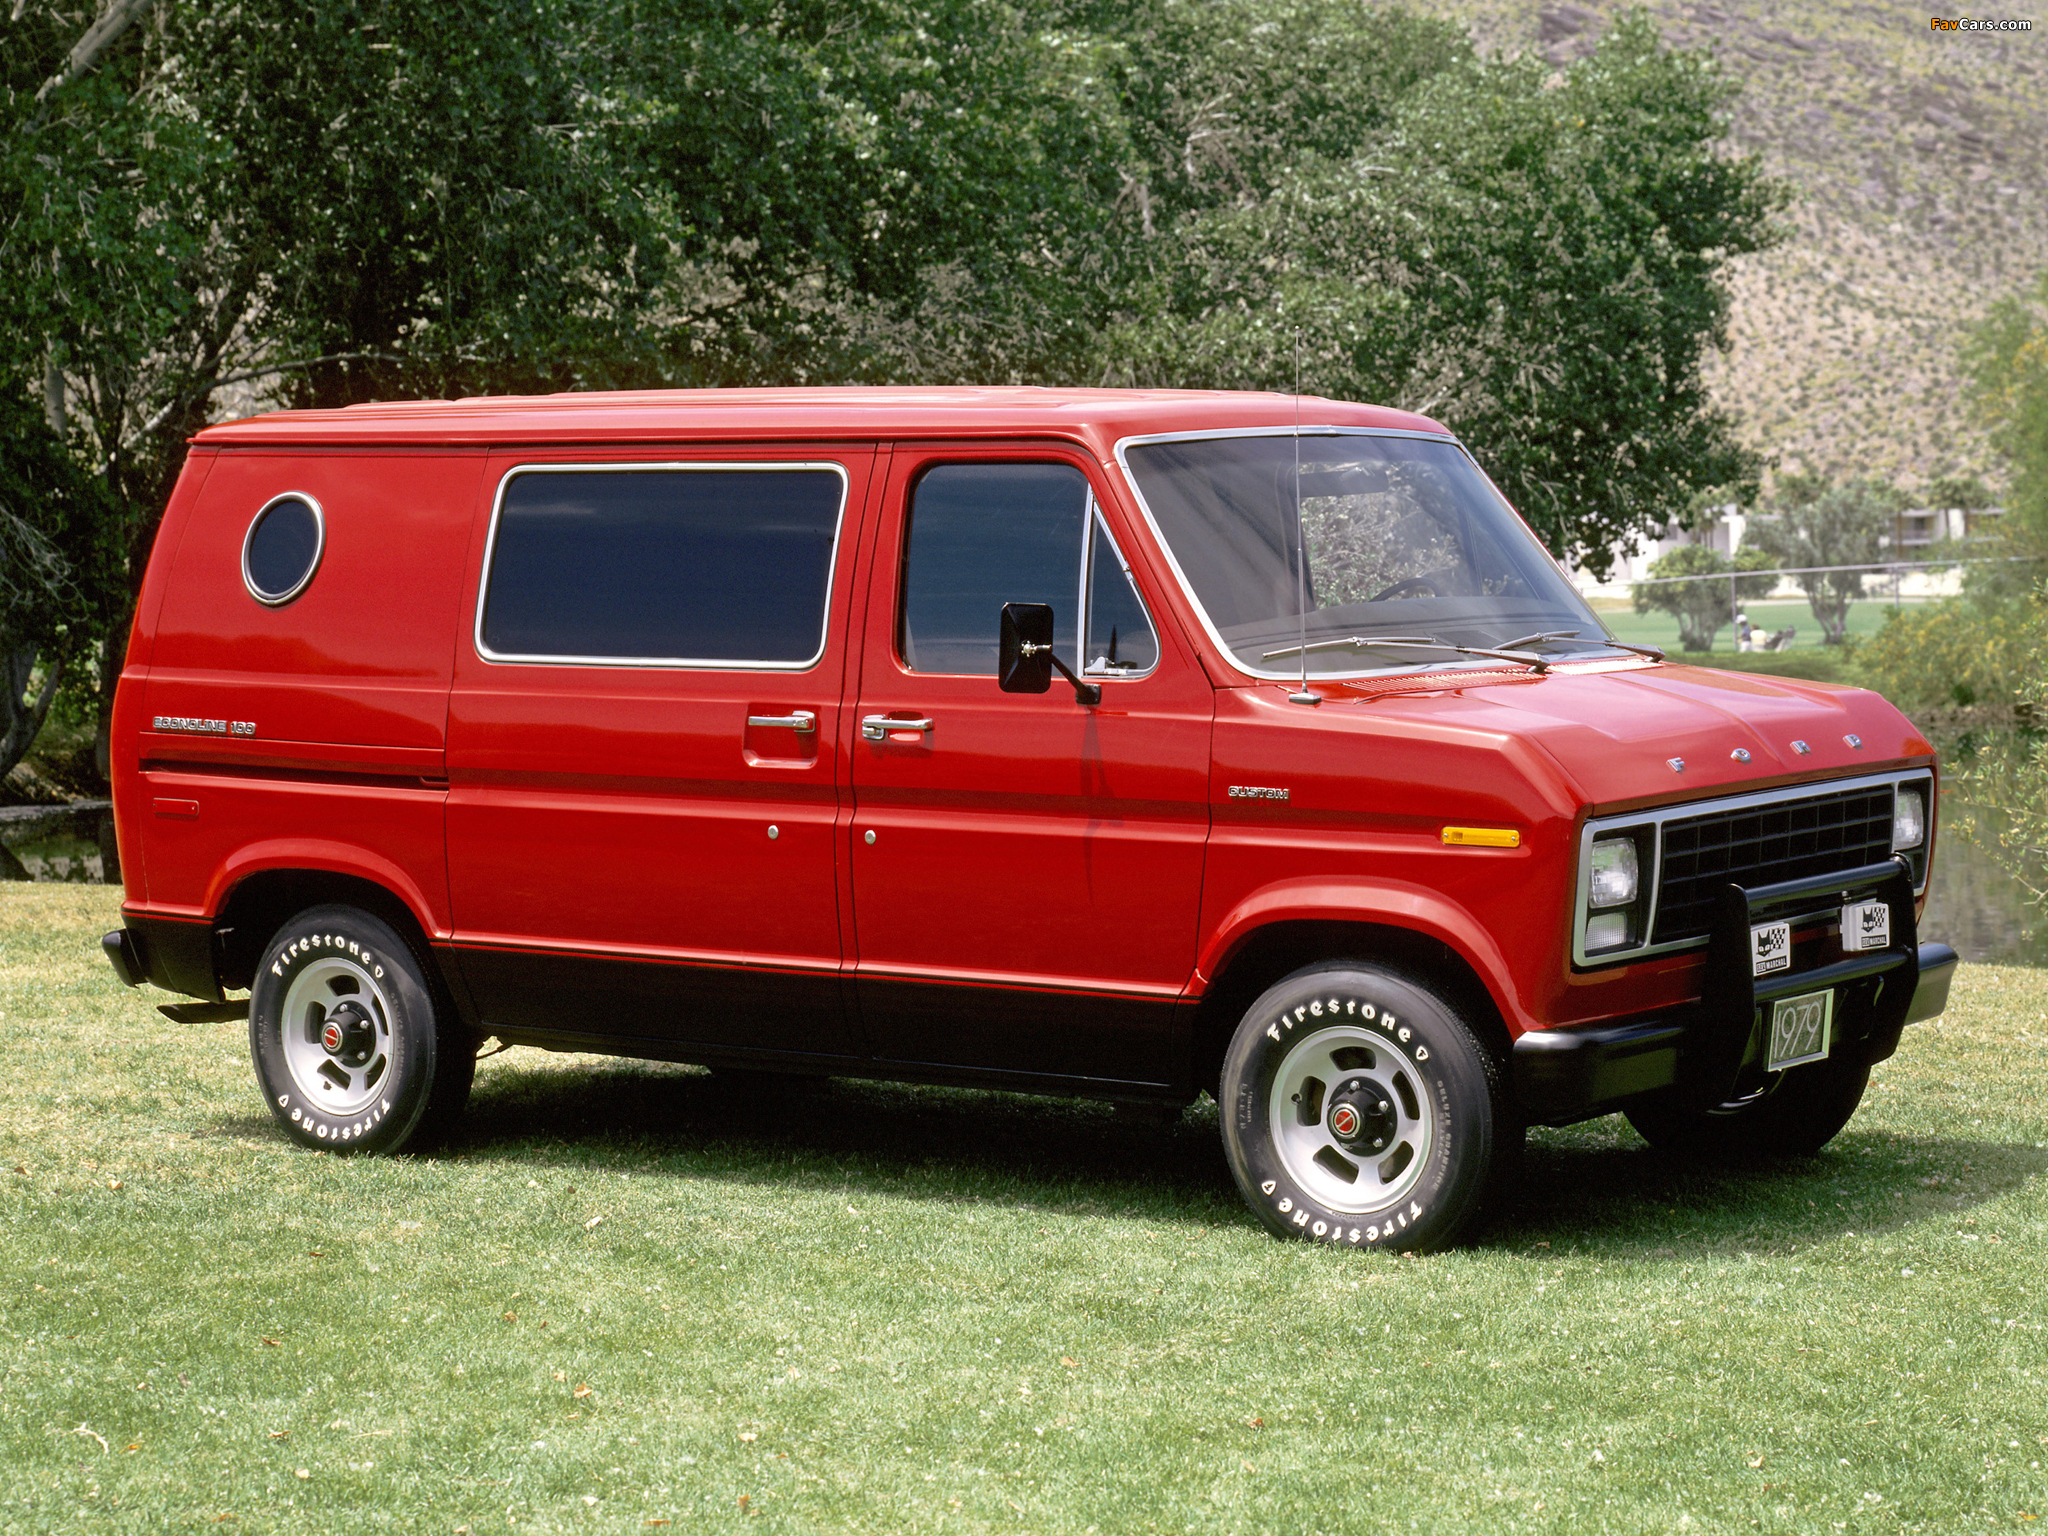 Ford Econoline Wallpapers